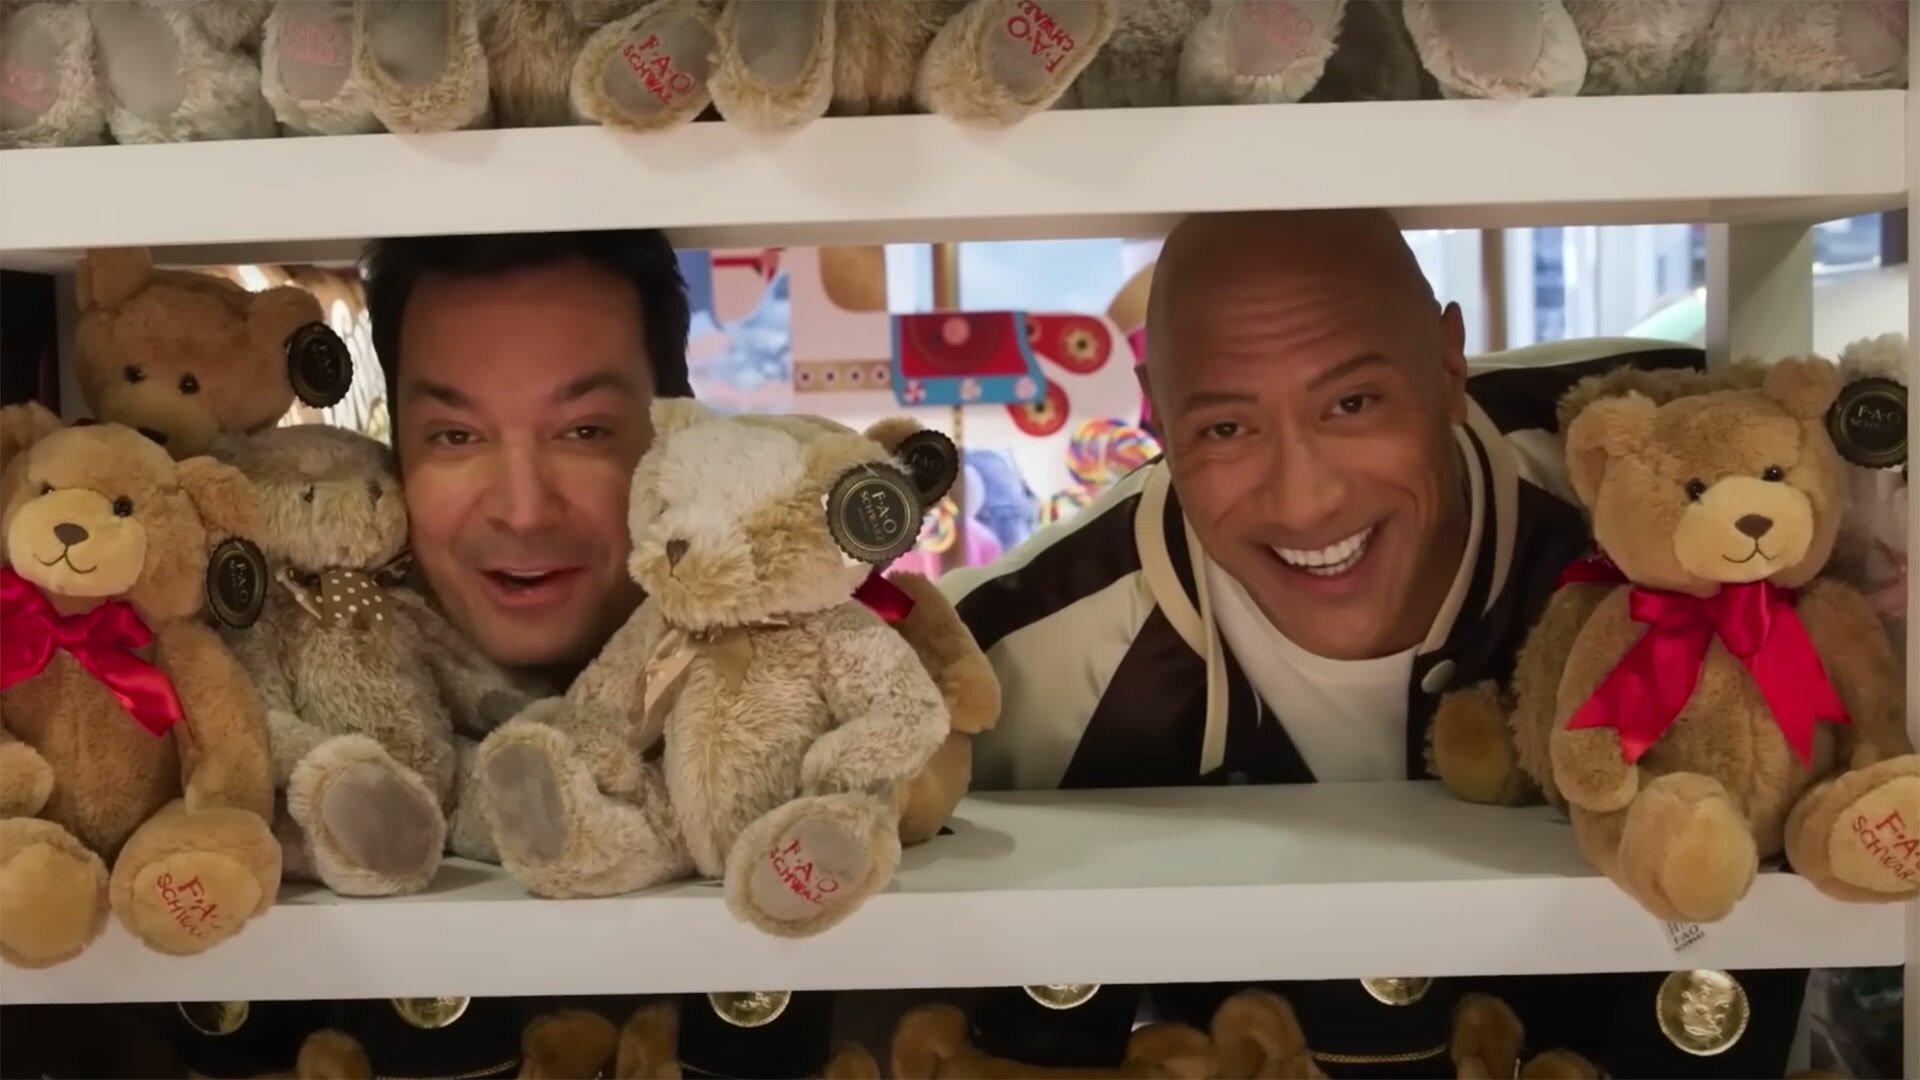 Two men poke their heads through rows of stuffed bears on a toy store shelf.